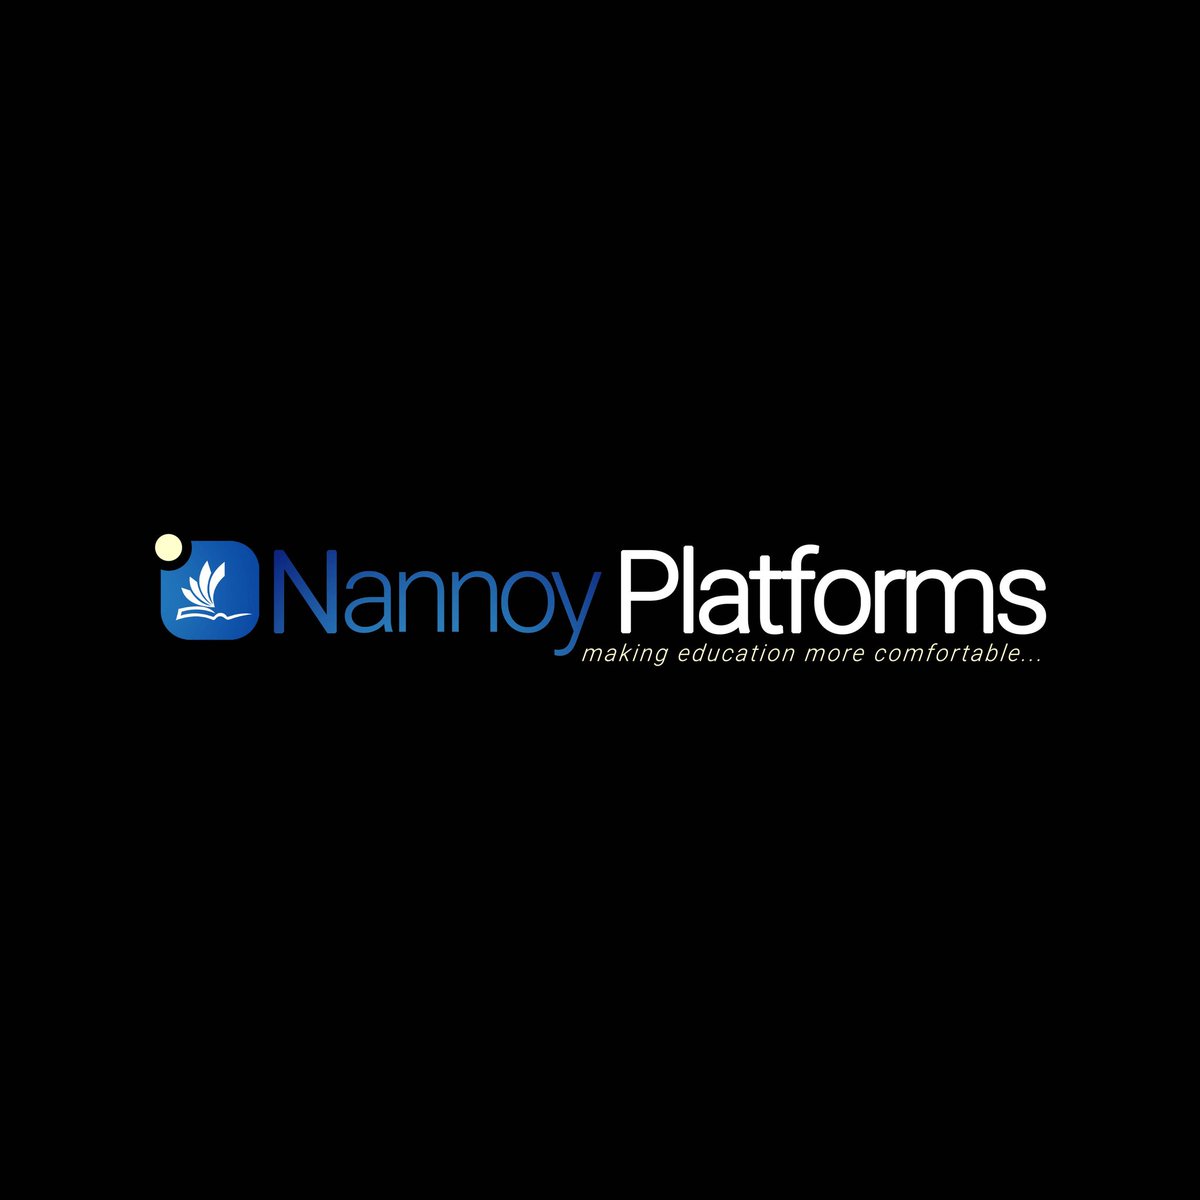 Attention students in Nigeria! Check out Nannoy Platforms - a revolutionary opportunity to earn while you study. #NannoyPlatforms #StudyAndEarn